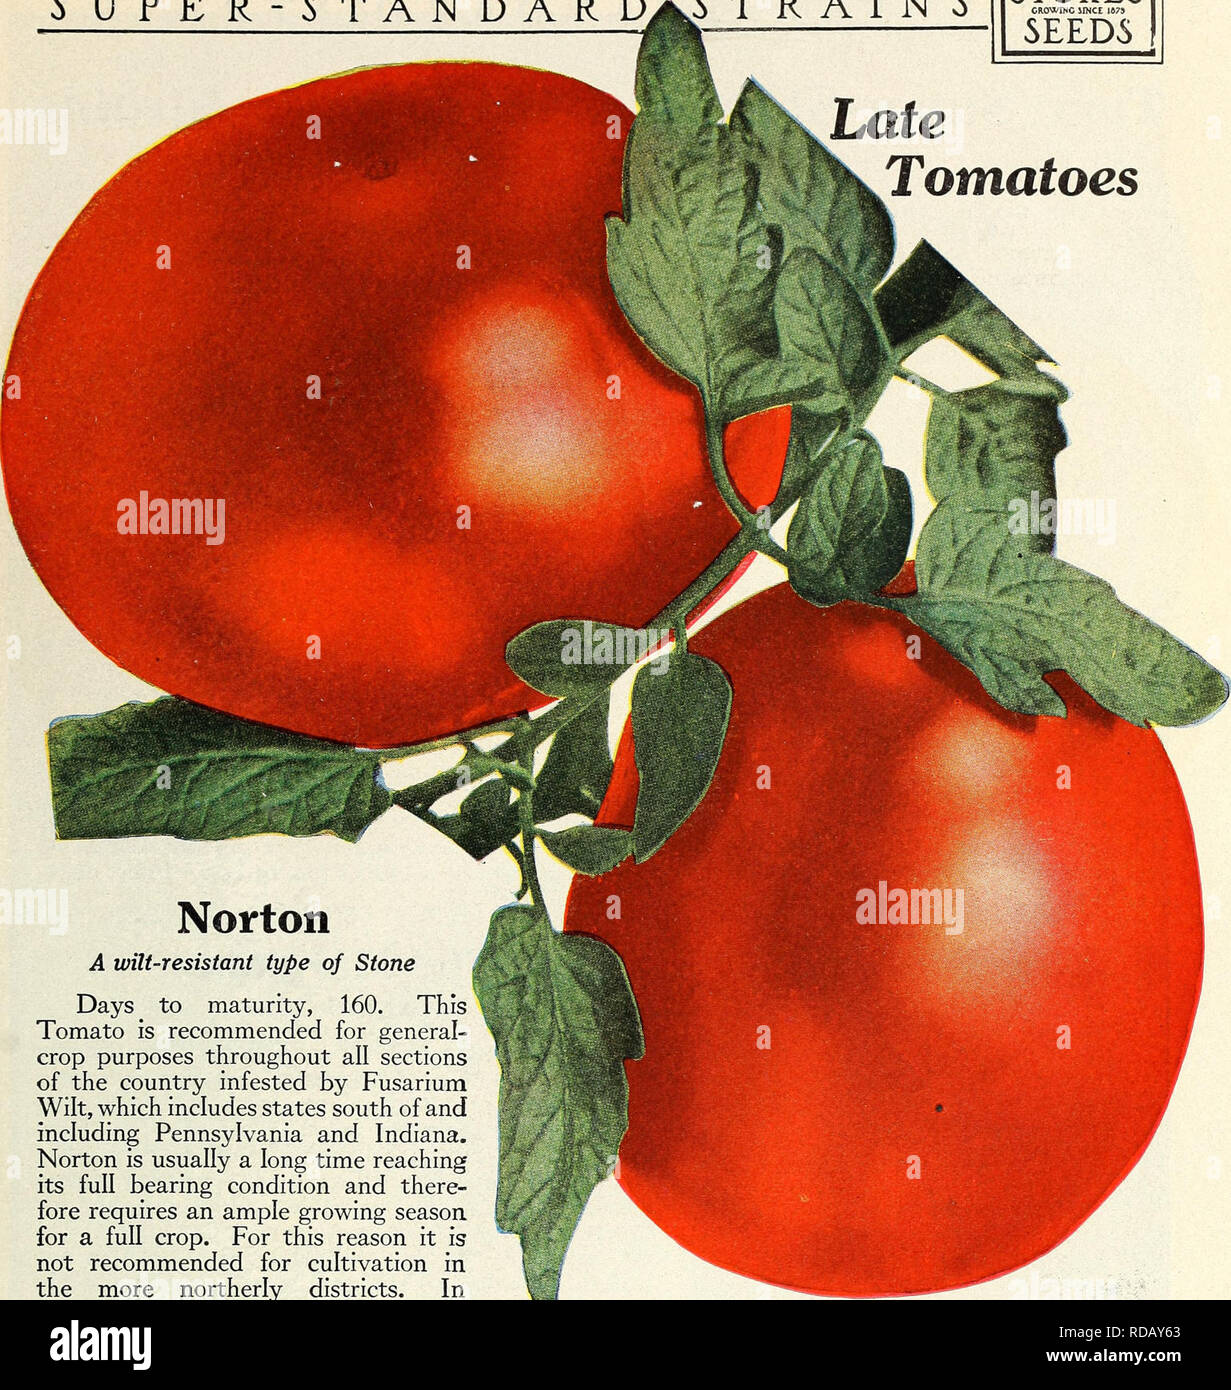 . Eighty-five super-standard strains season of 1927. Tomatoes Seeds Catalogs; Vegetables Seeds Catalogs; Fruit Seeds Catalogs. STRAINS STOKES GROWIHC JINCE IS79 C T? T? T&quot; C Late Tomatoes. A wilt-resistant type of Stone Days to maturity, 160. This Tomato is recommended for general- crop purposes throughout all sections of the country infested by Fusarium Wilt, which includes states south of and including Pennsylvania and Indiana. Norton is usually a long time reaching its full bearing condition and there- fore requires an ample growing season for a full crop. For this reason it is not re Stock Photo